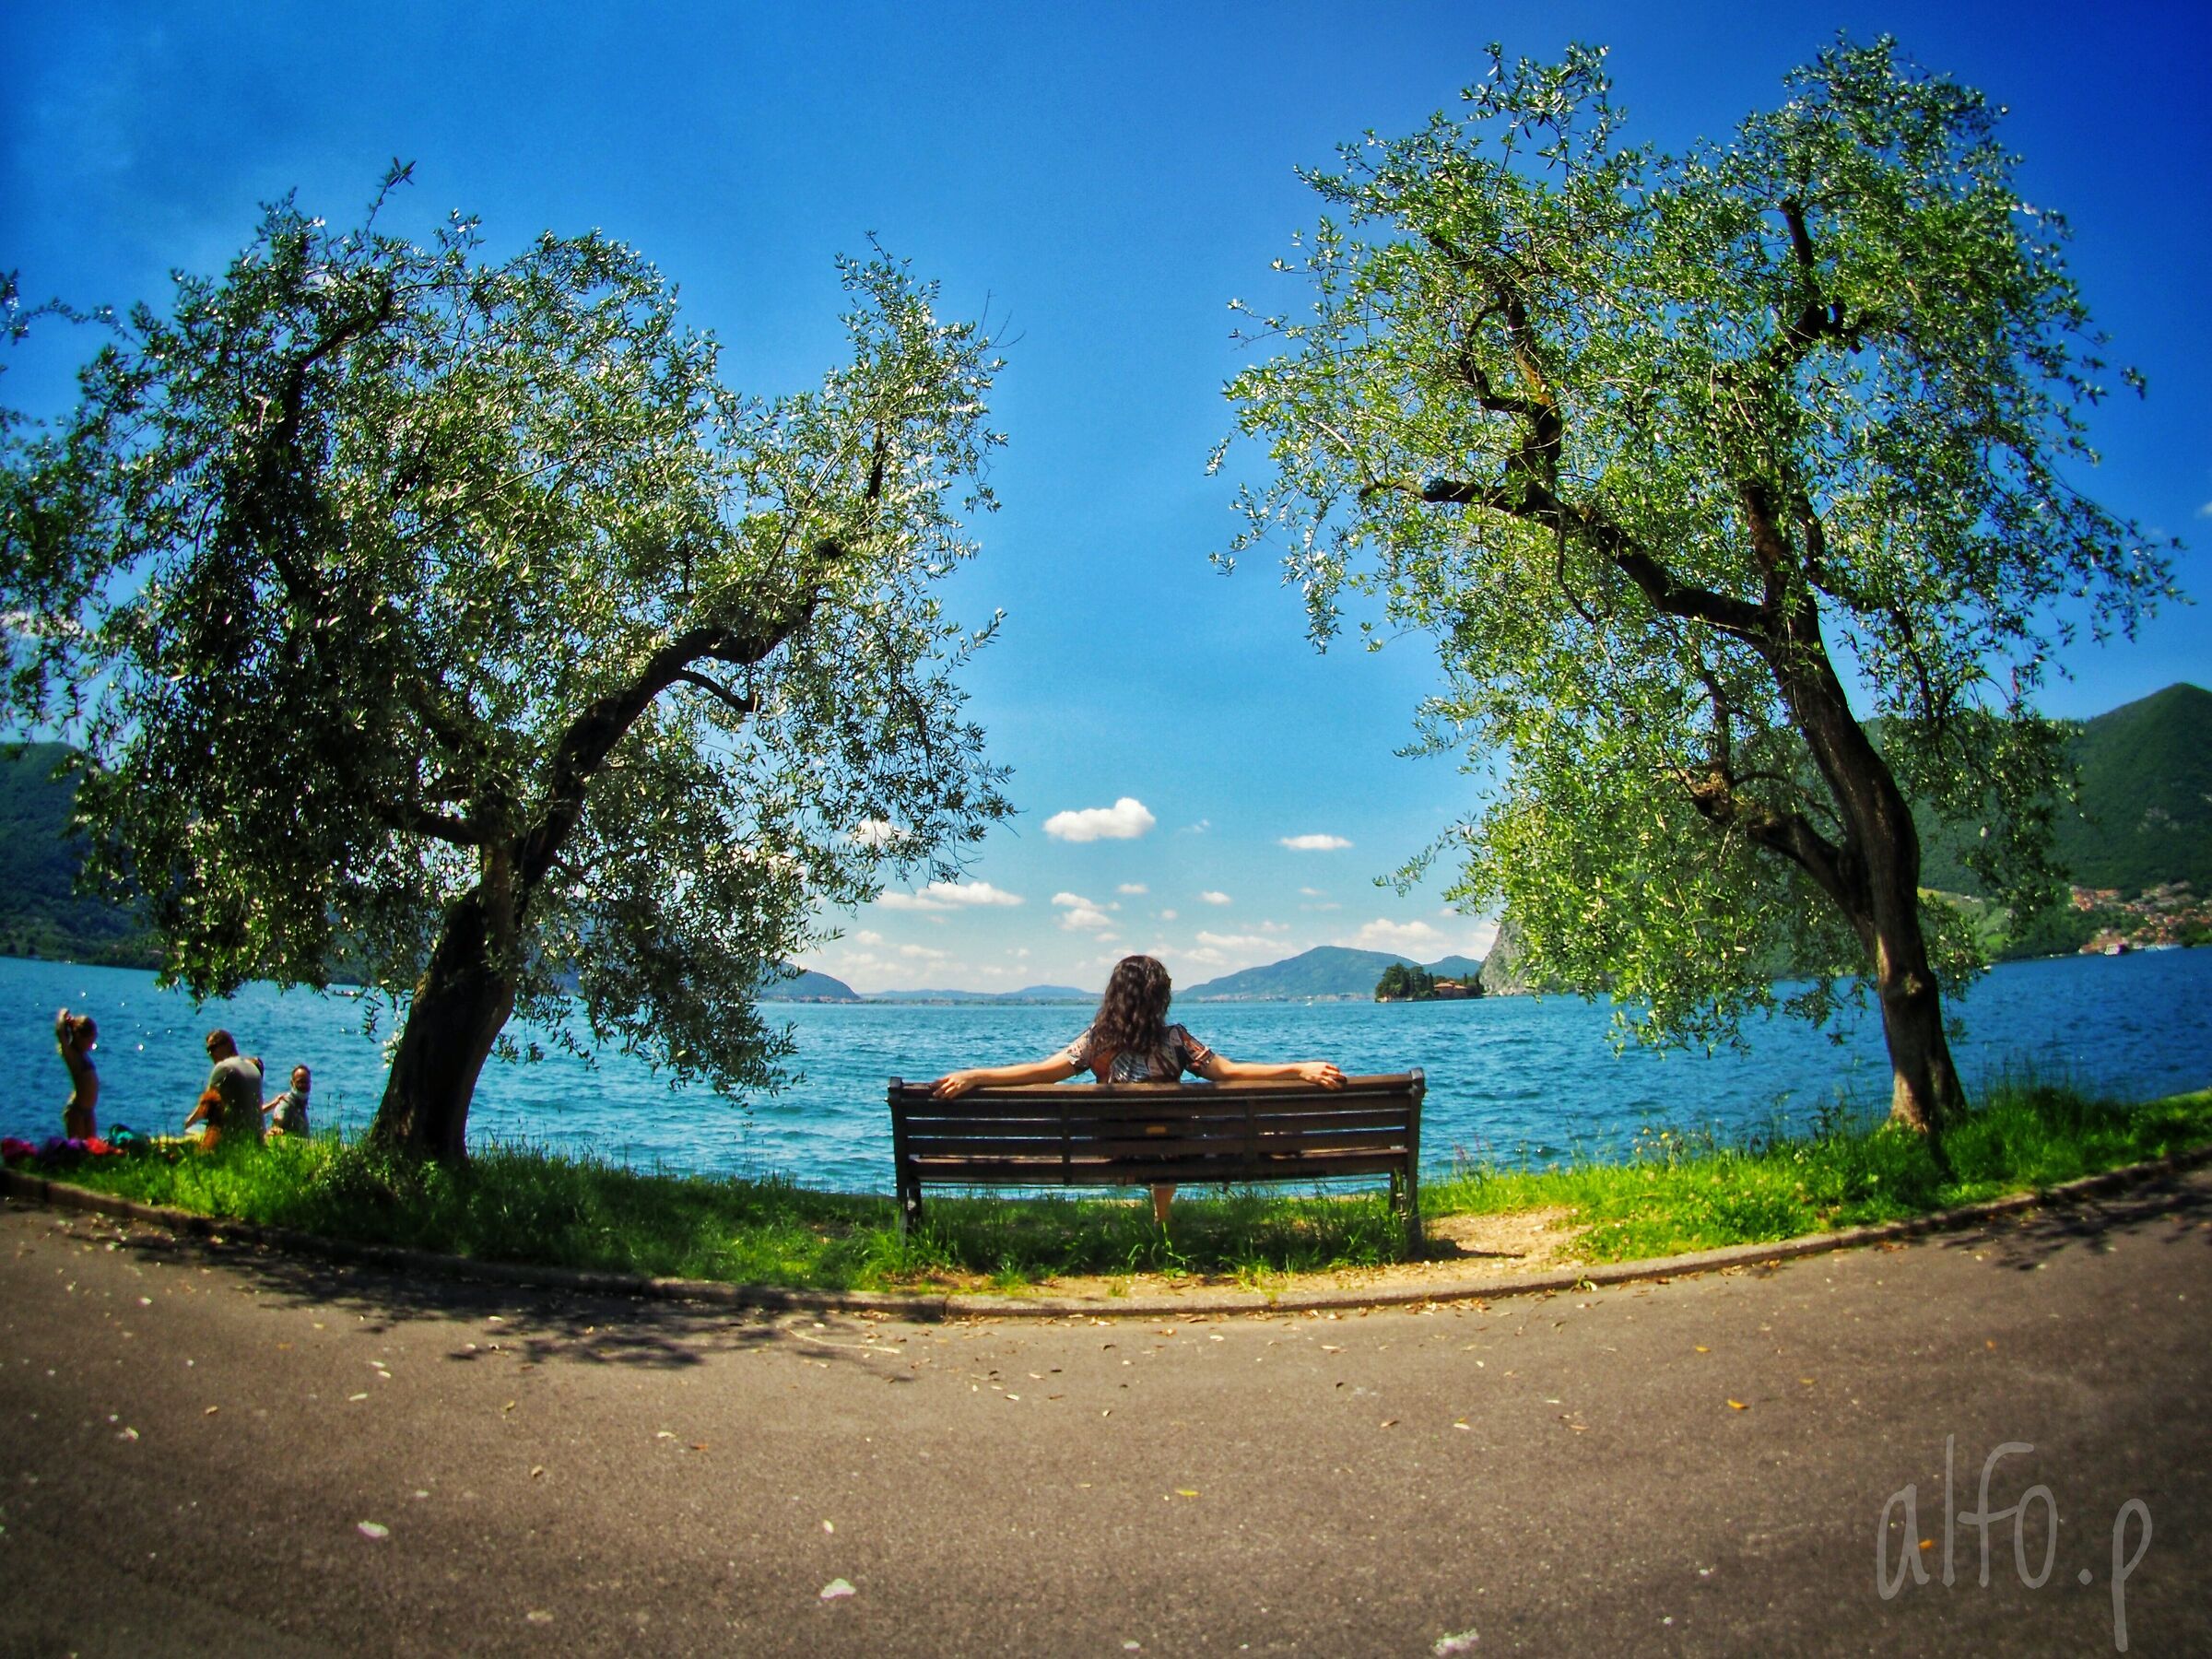 A girl, a bench and Iseo...